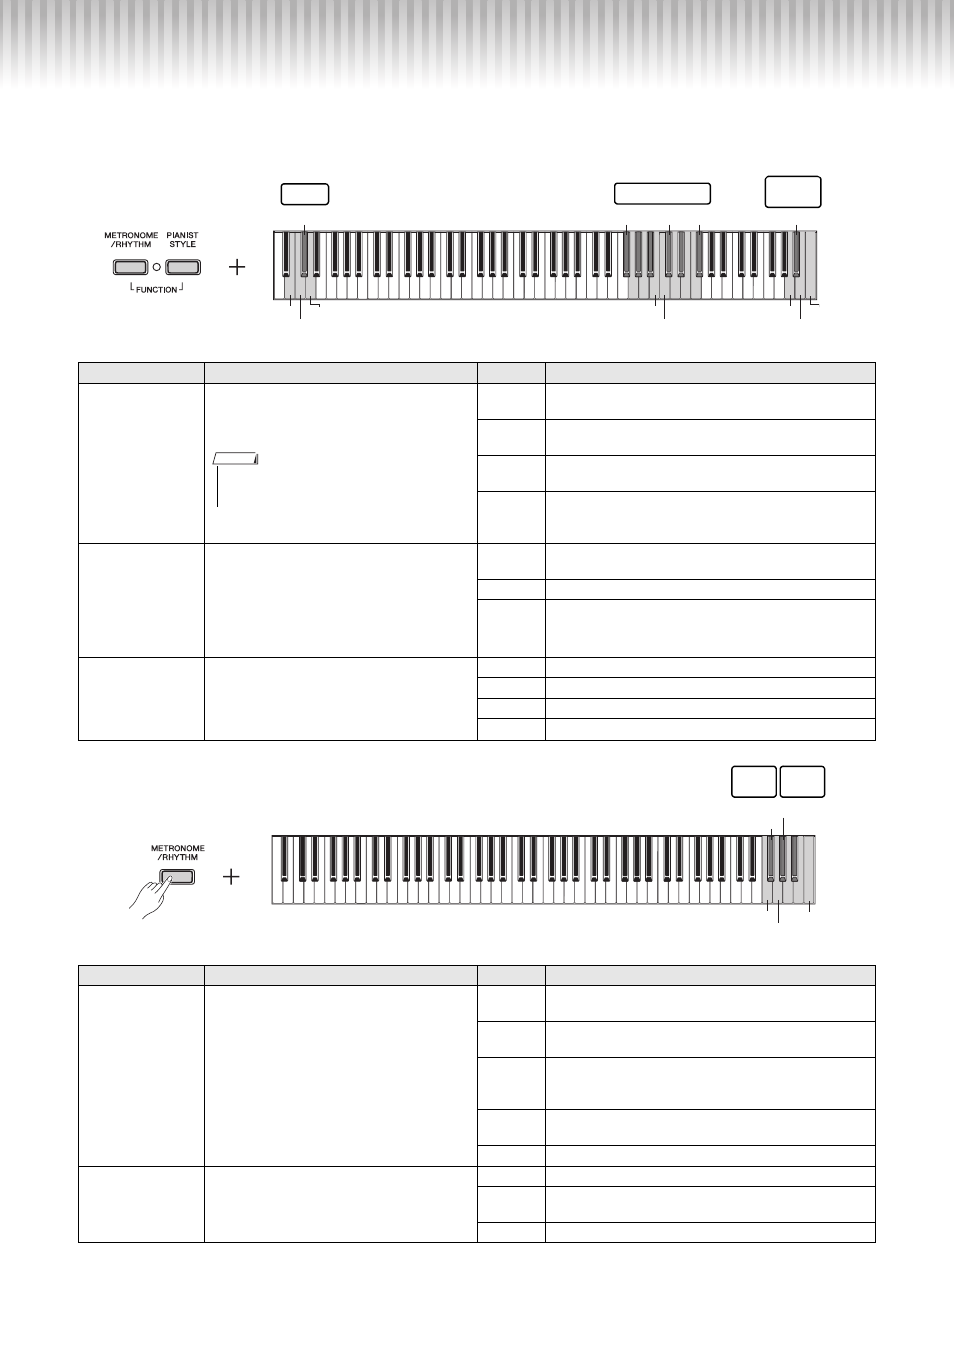 Setting various items for performances | Yamaha P-115 User Manual | Page 16  / 32